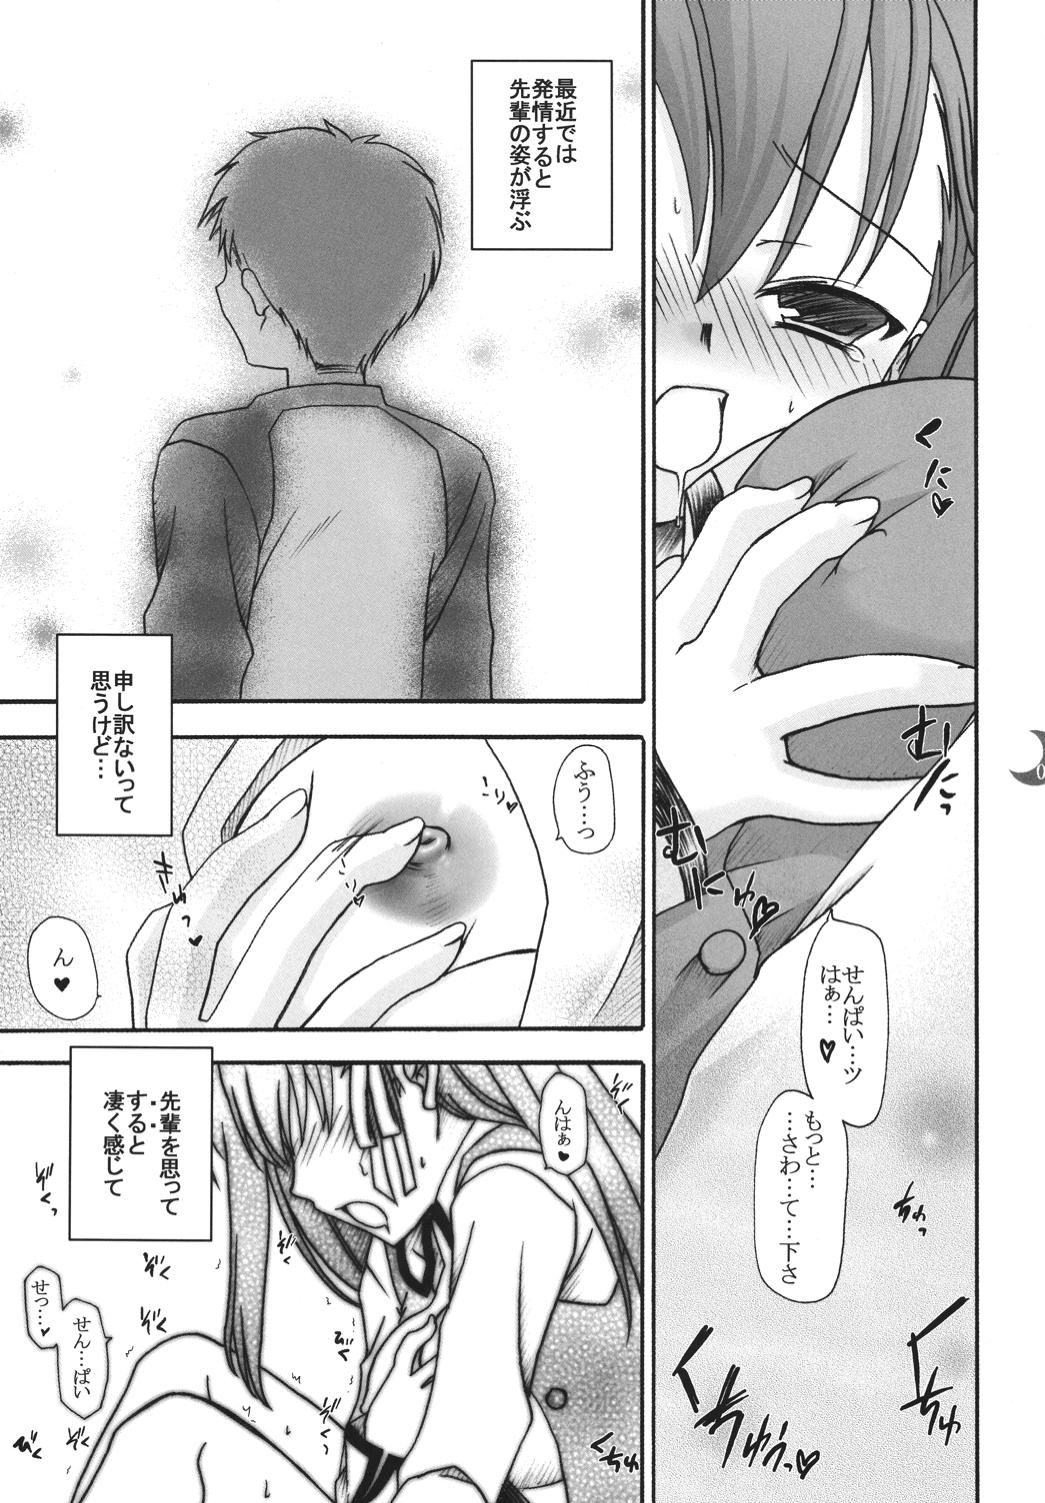 Blowing Hatsujou Toiki - Fate stay night Spooning - Page 6